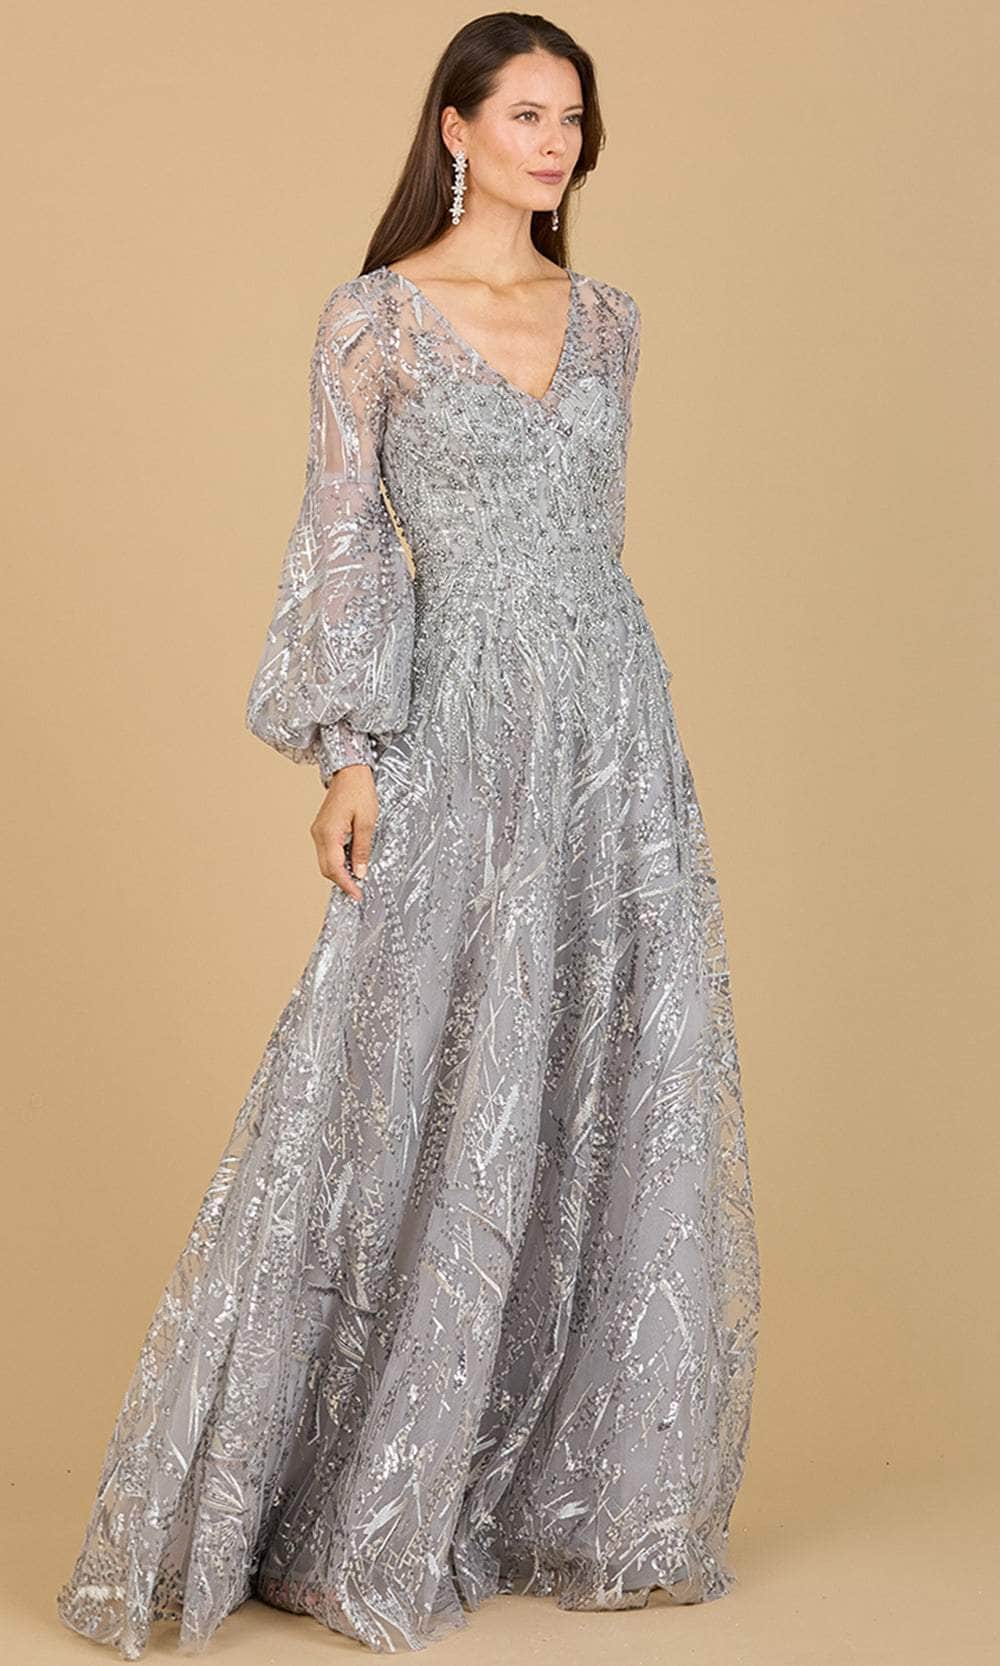 Image of Lara Dresses 29198 - Bishop Sleeve Lace Evening Gown